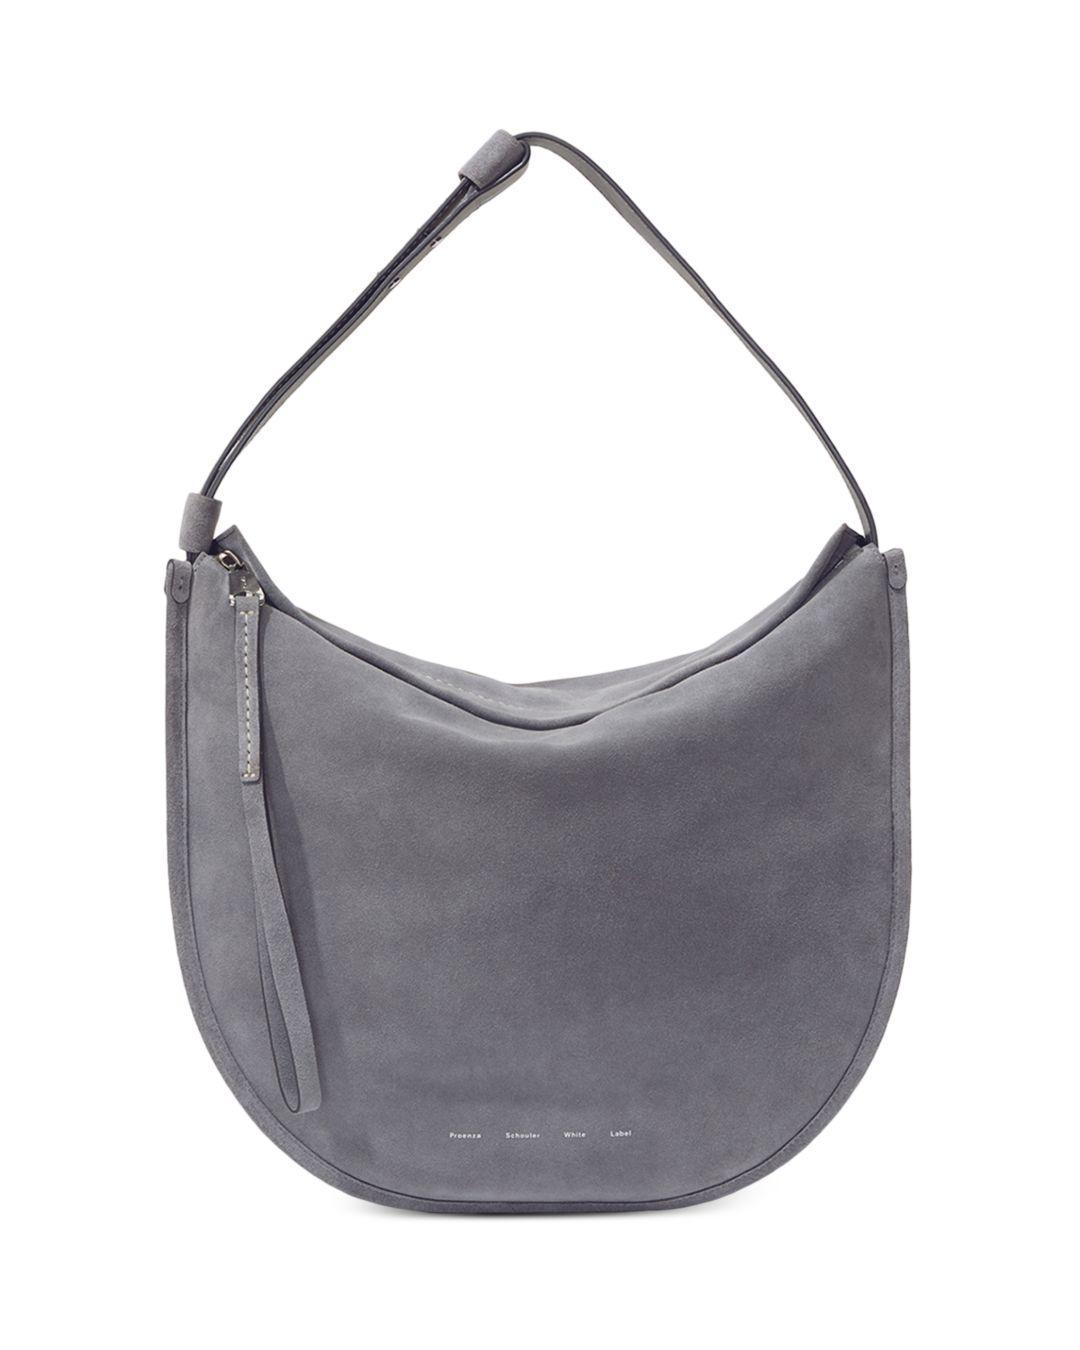 PROENZA SCHOULER WHITE LABEL Baxter Zip Leather Hobo Bag in Brown